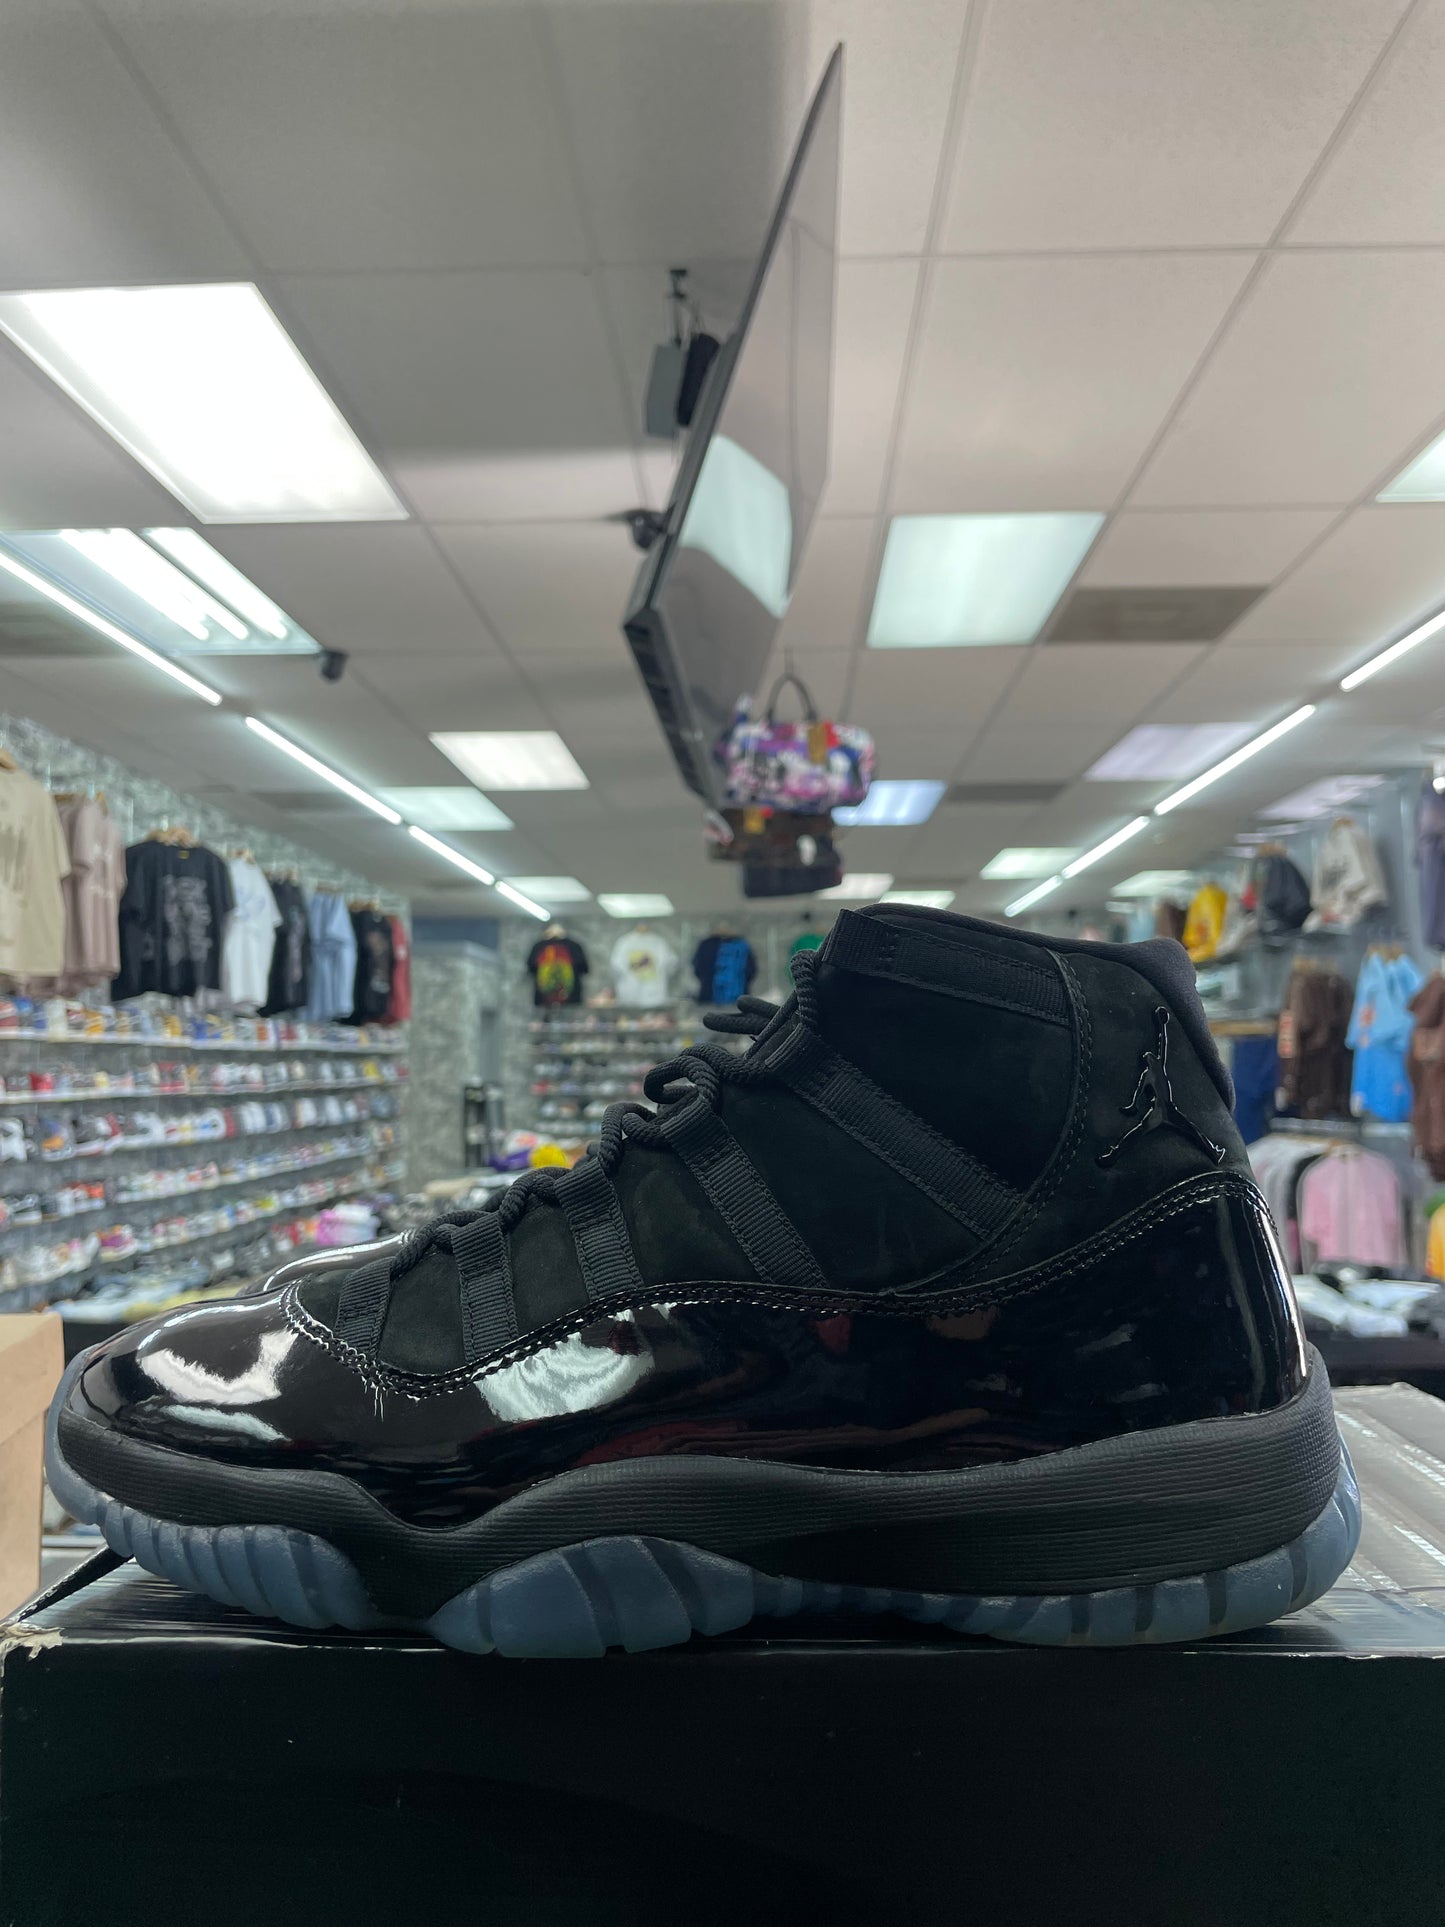 Air Jordan Retro 11 “Cap and Gown” *Preowned Size 9.5*